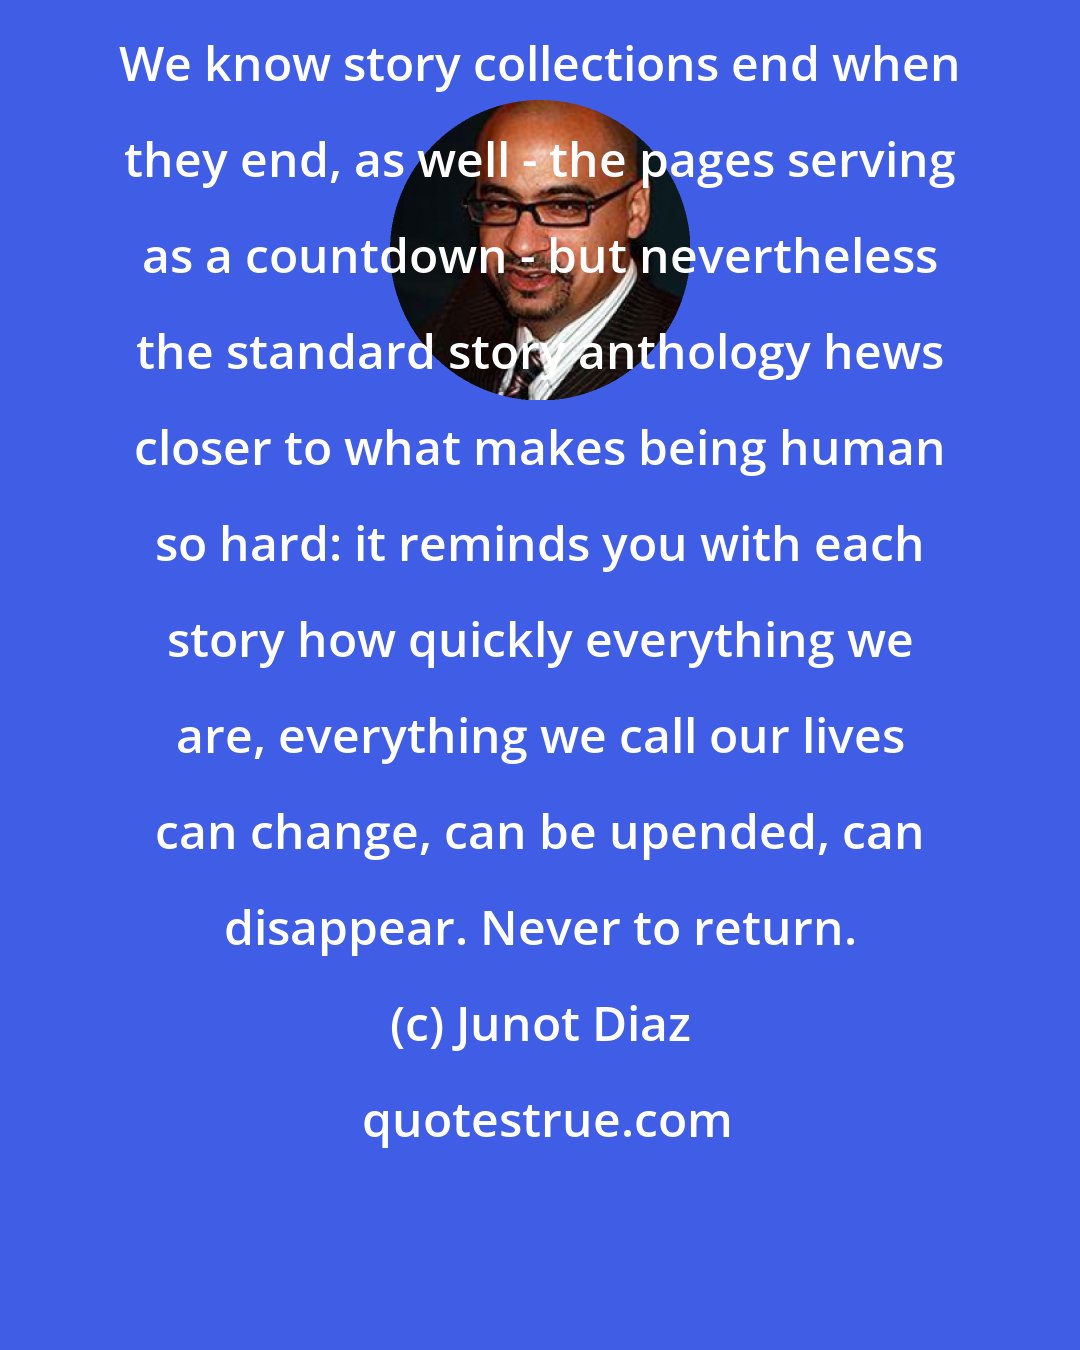 Junot Diaz: We know story collections end when they end, as well - the pages serving as a countdown - but nevertheless the standard story anthology hews closer to what makes being human so hard: it reminds you with each story how quickly everything we are, everything we call our lives can change, can be upended, can disappear. Never to return.